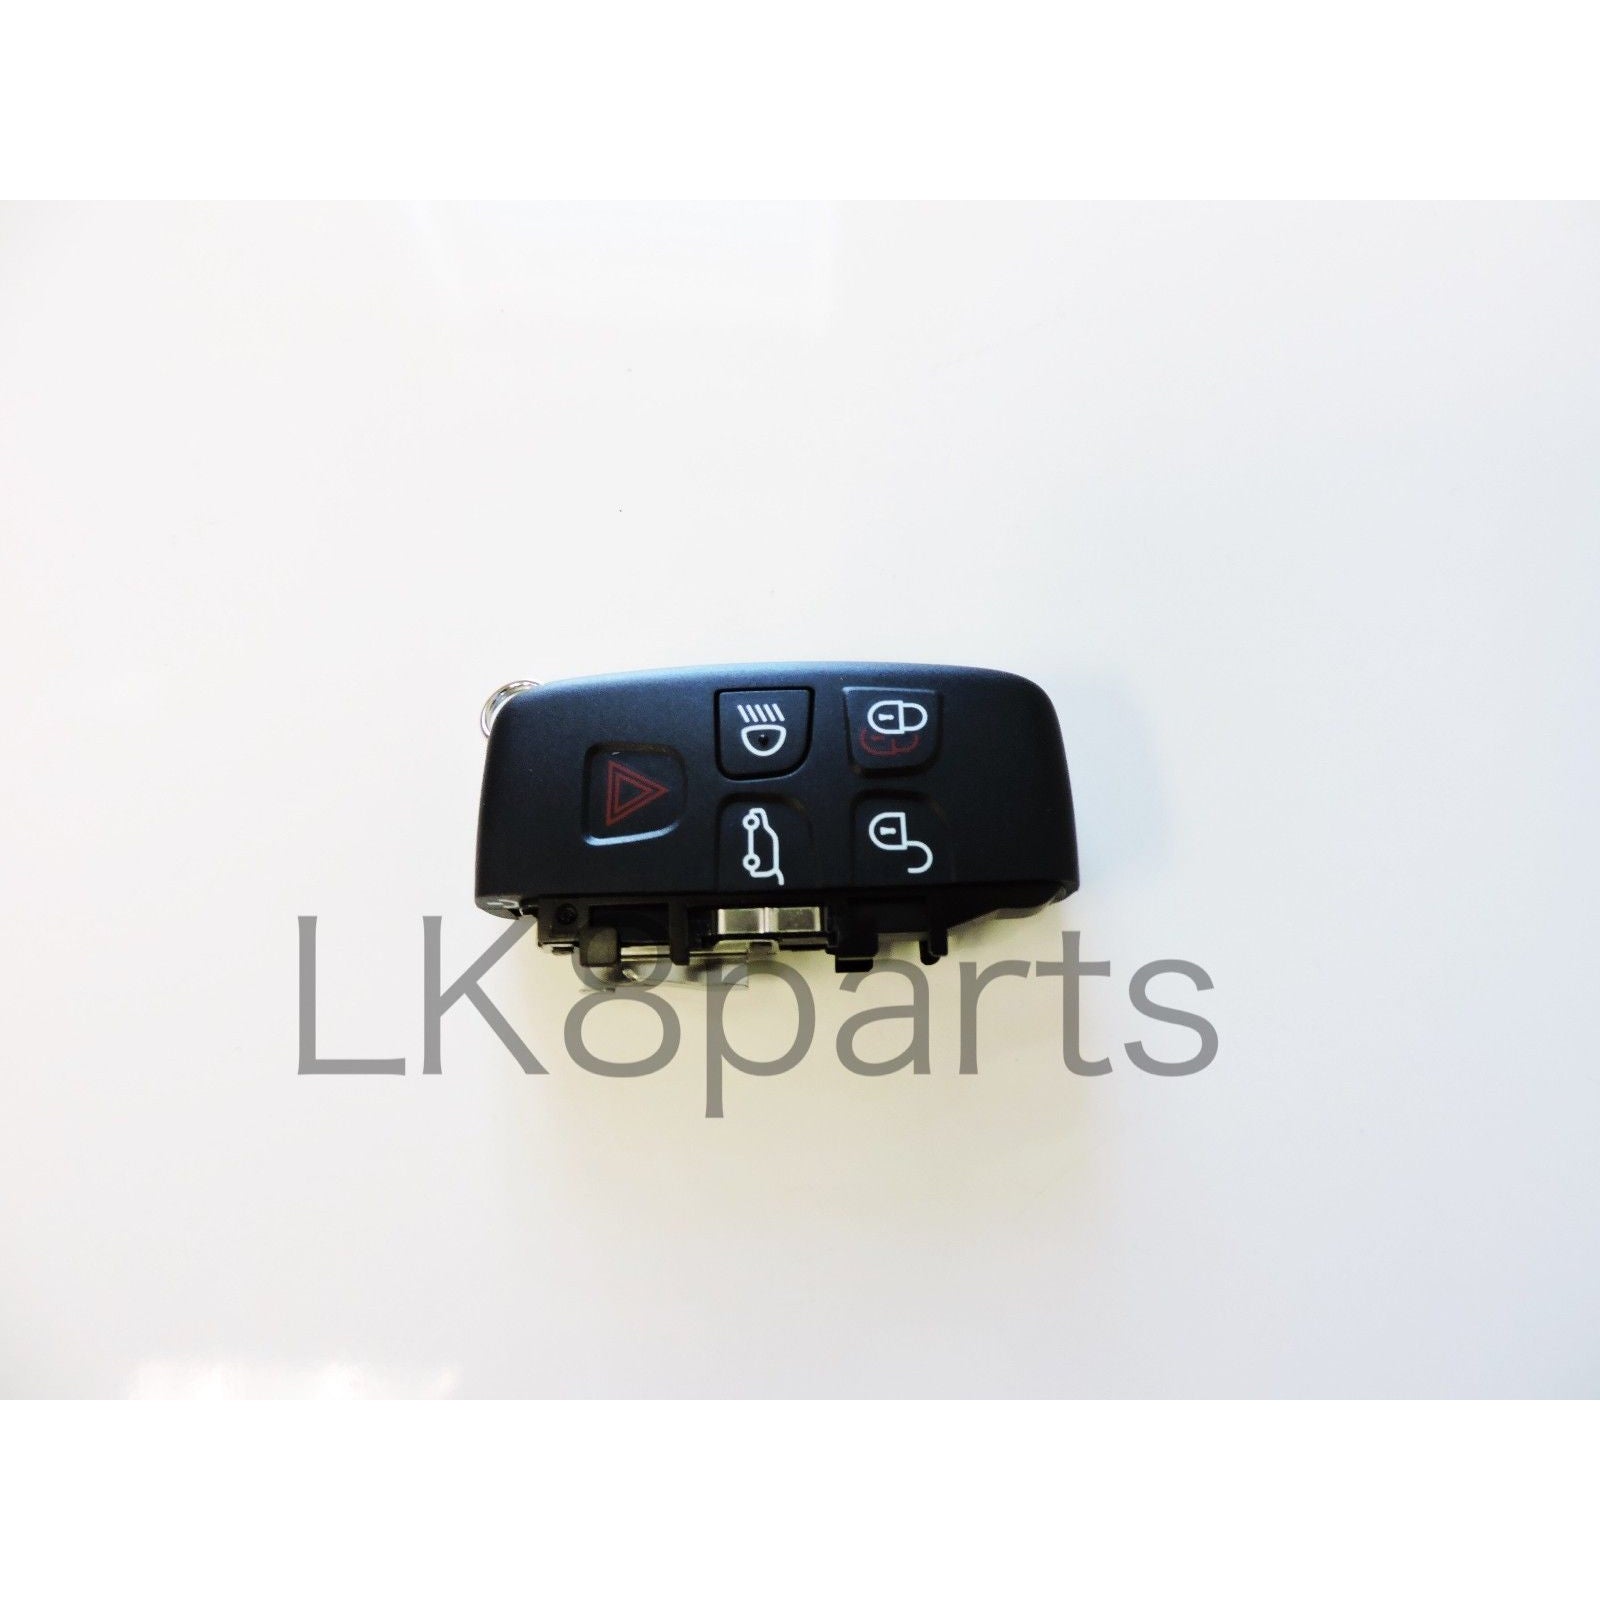 Remote Key Fob Cover Case For Range Rover - LR078921